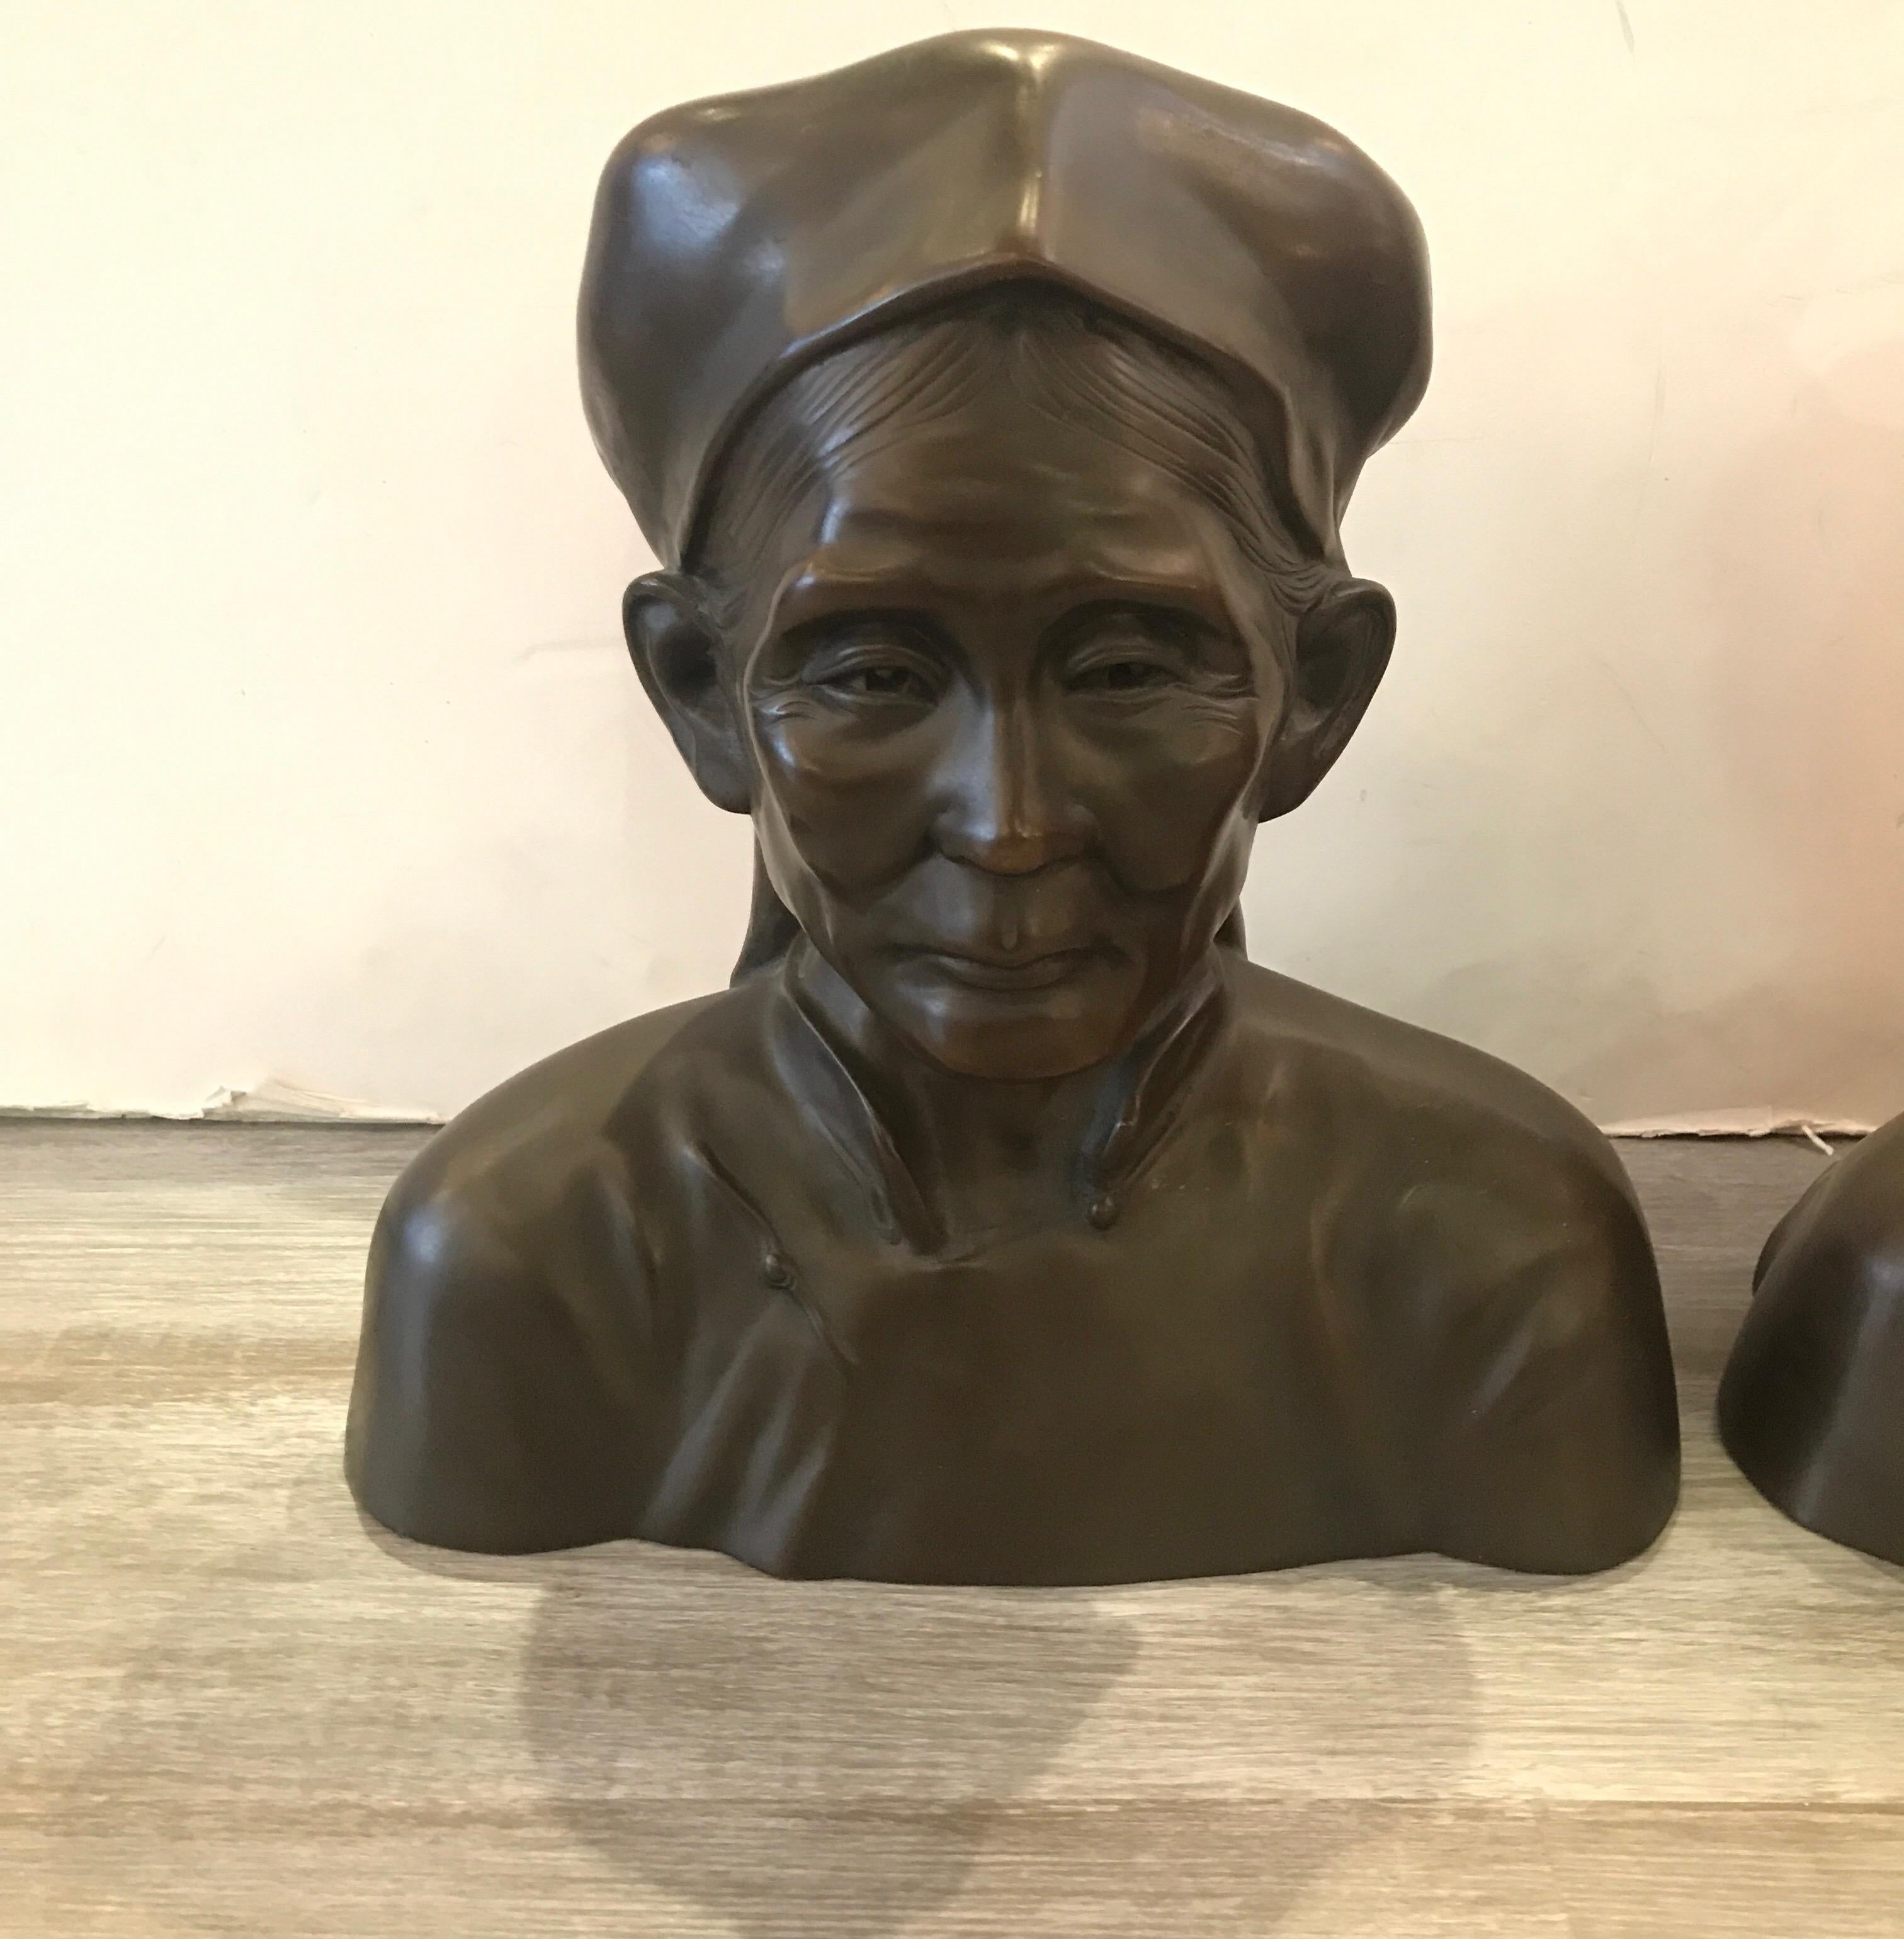 A fine pair of beautifully cast busts of an elderly Chinese couple. The French cast bronzes are a realistic and authentic depiction of a husband and wife.